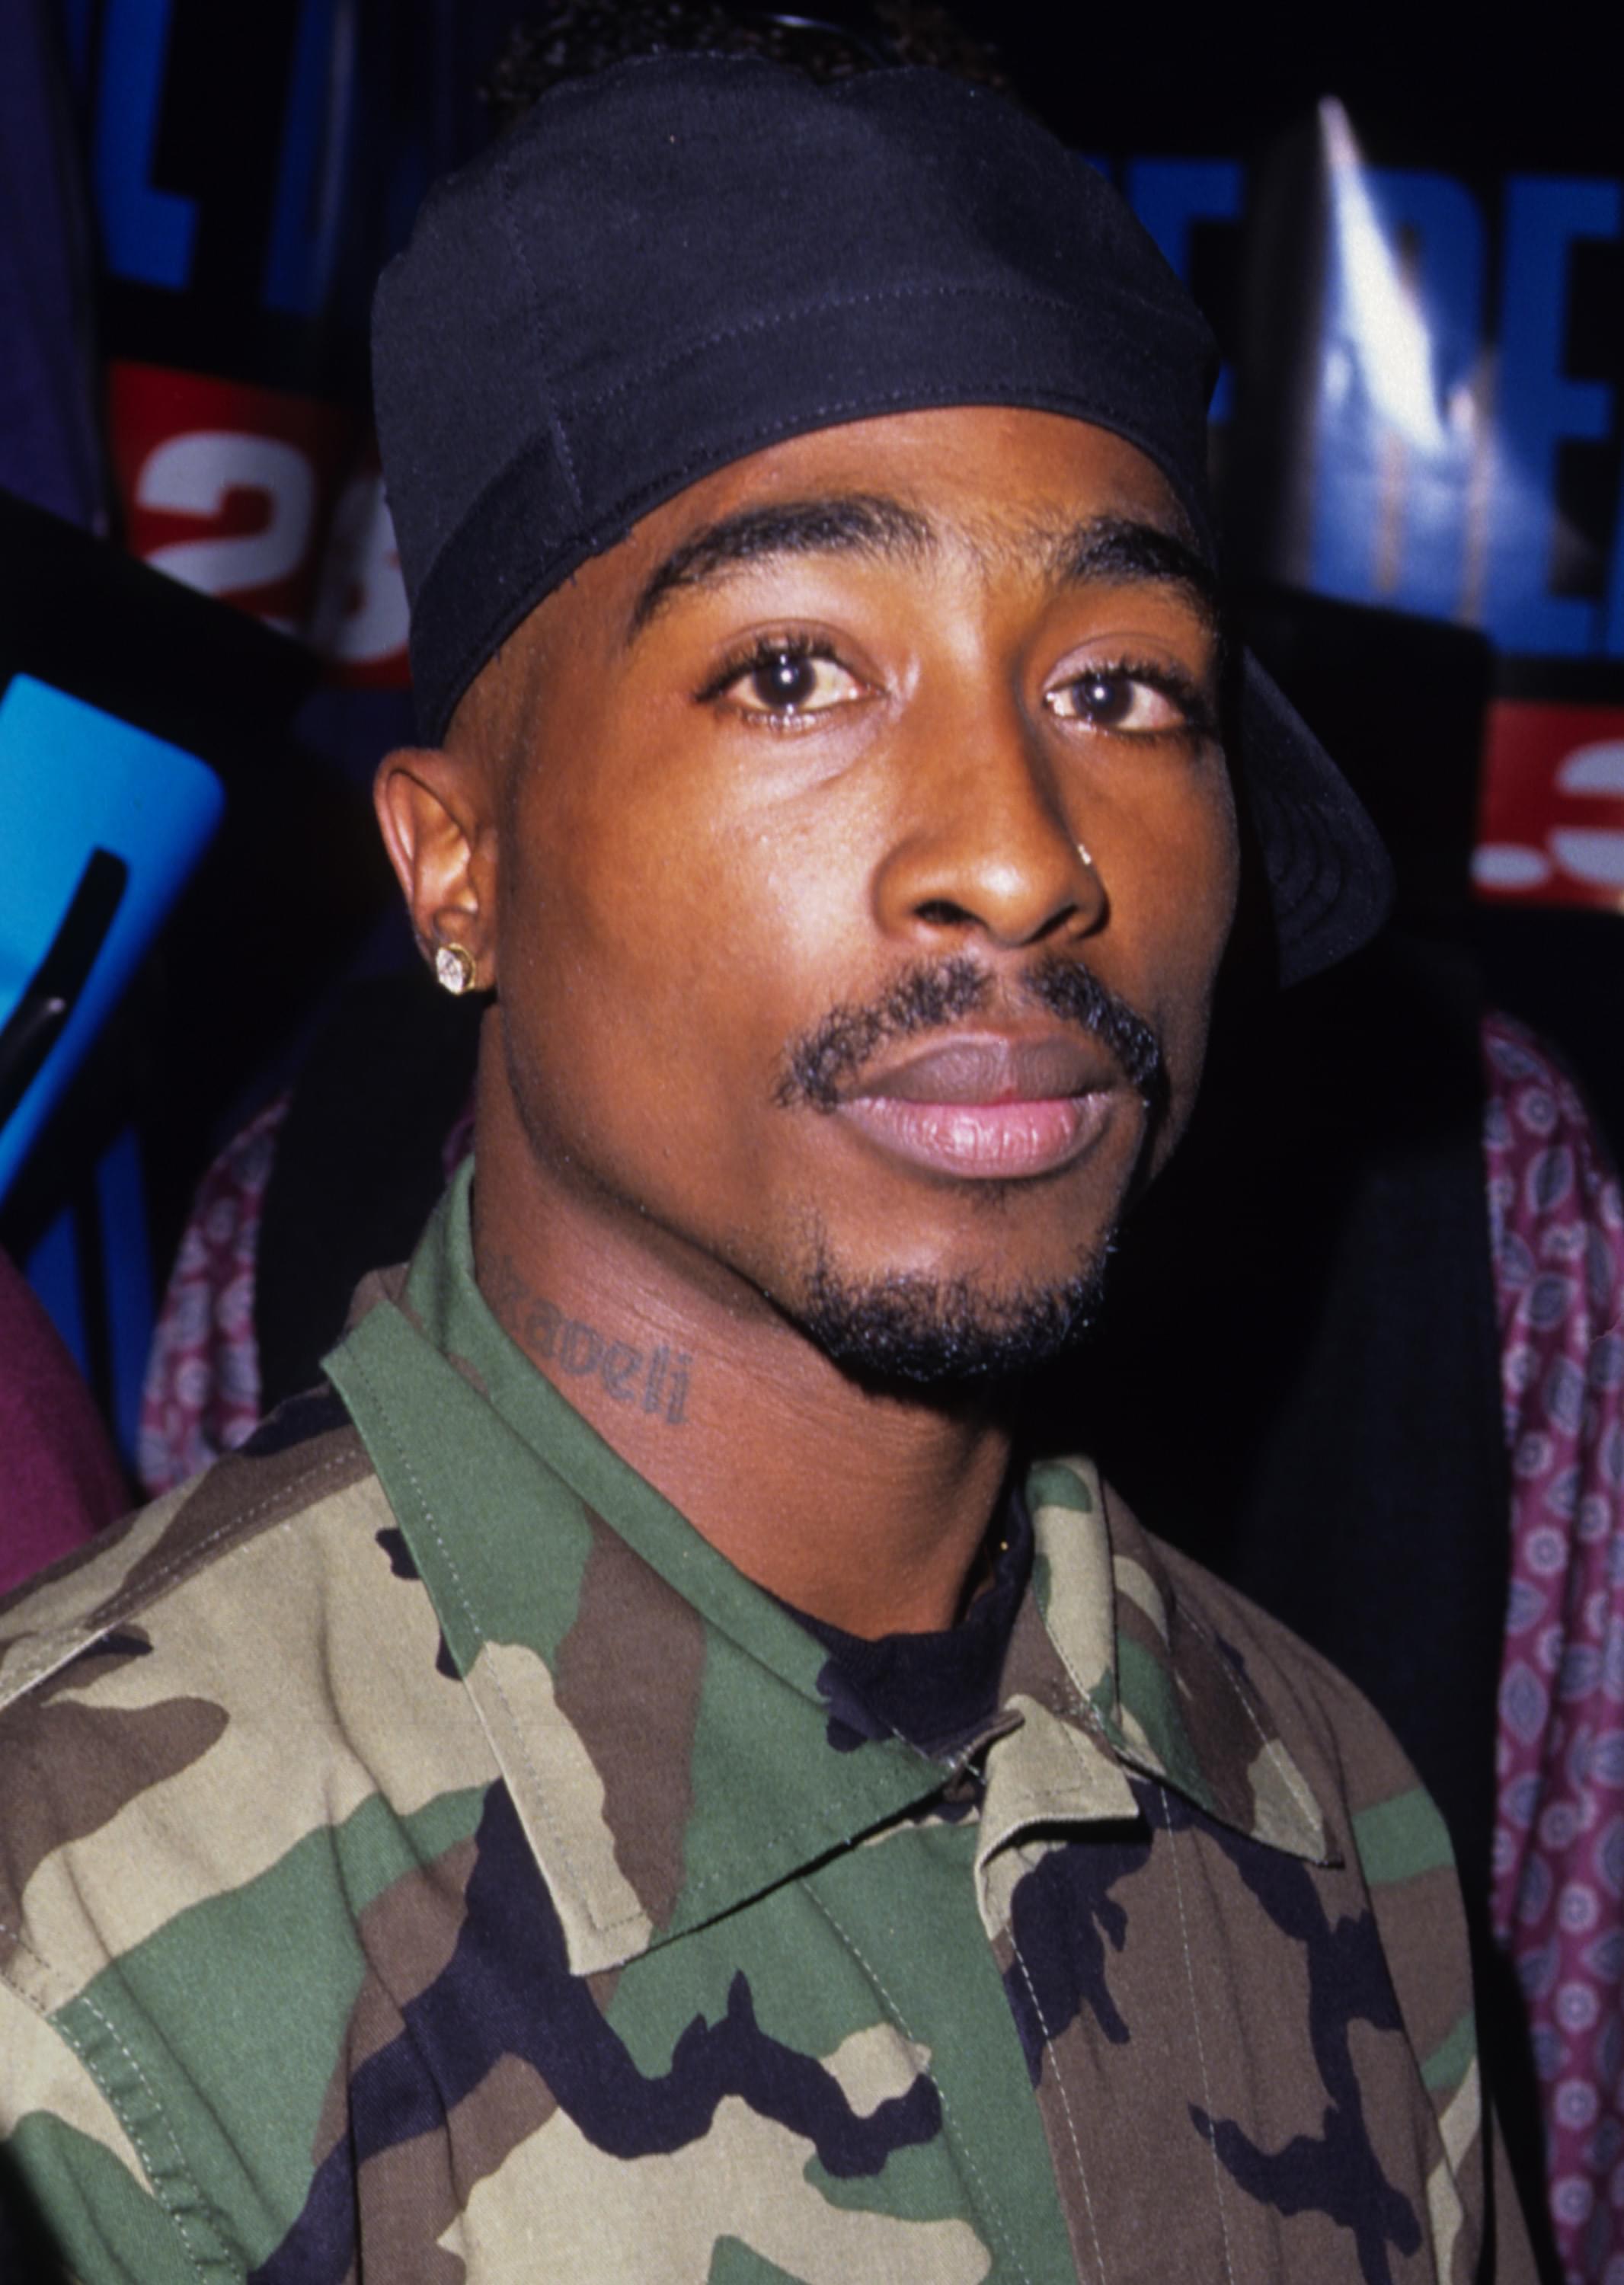 A Prison Letter Written By Tupac Details Why He Broke Off His Relationship With Madonna